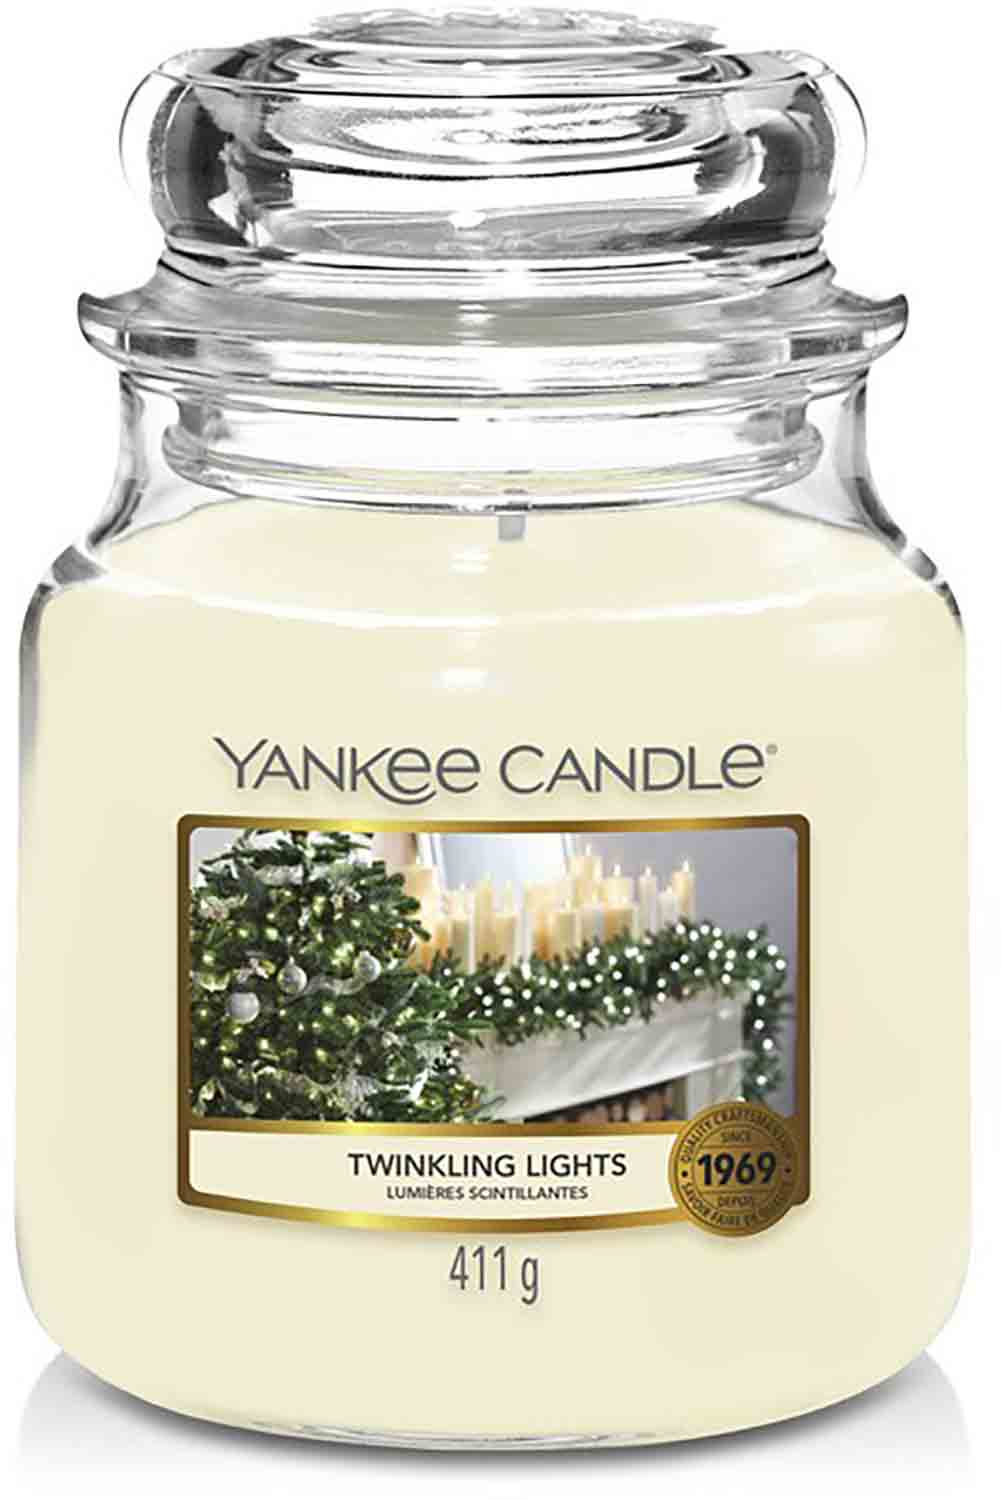 Yankee Candle Twinkling Lights 411g Assorted